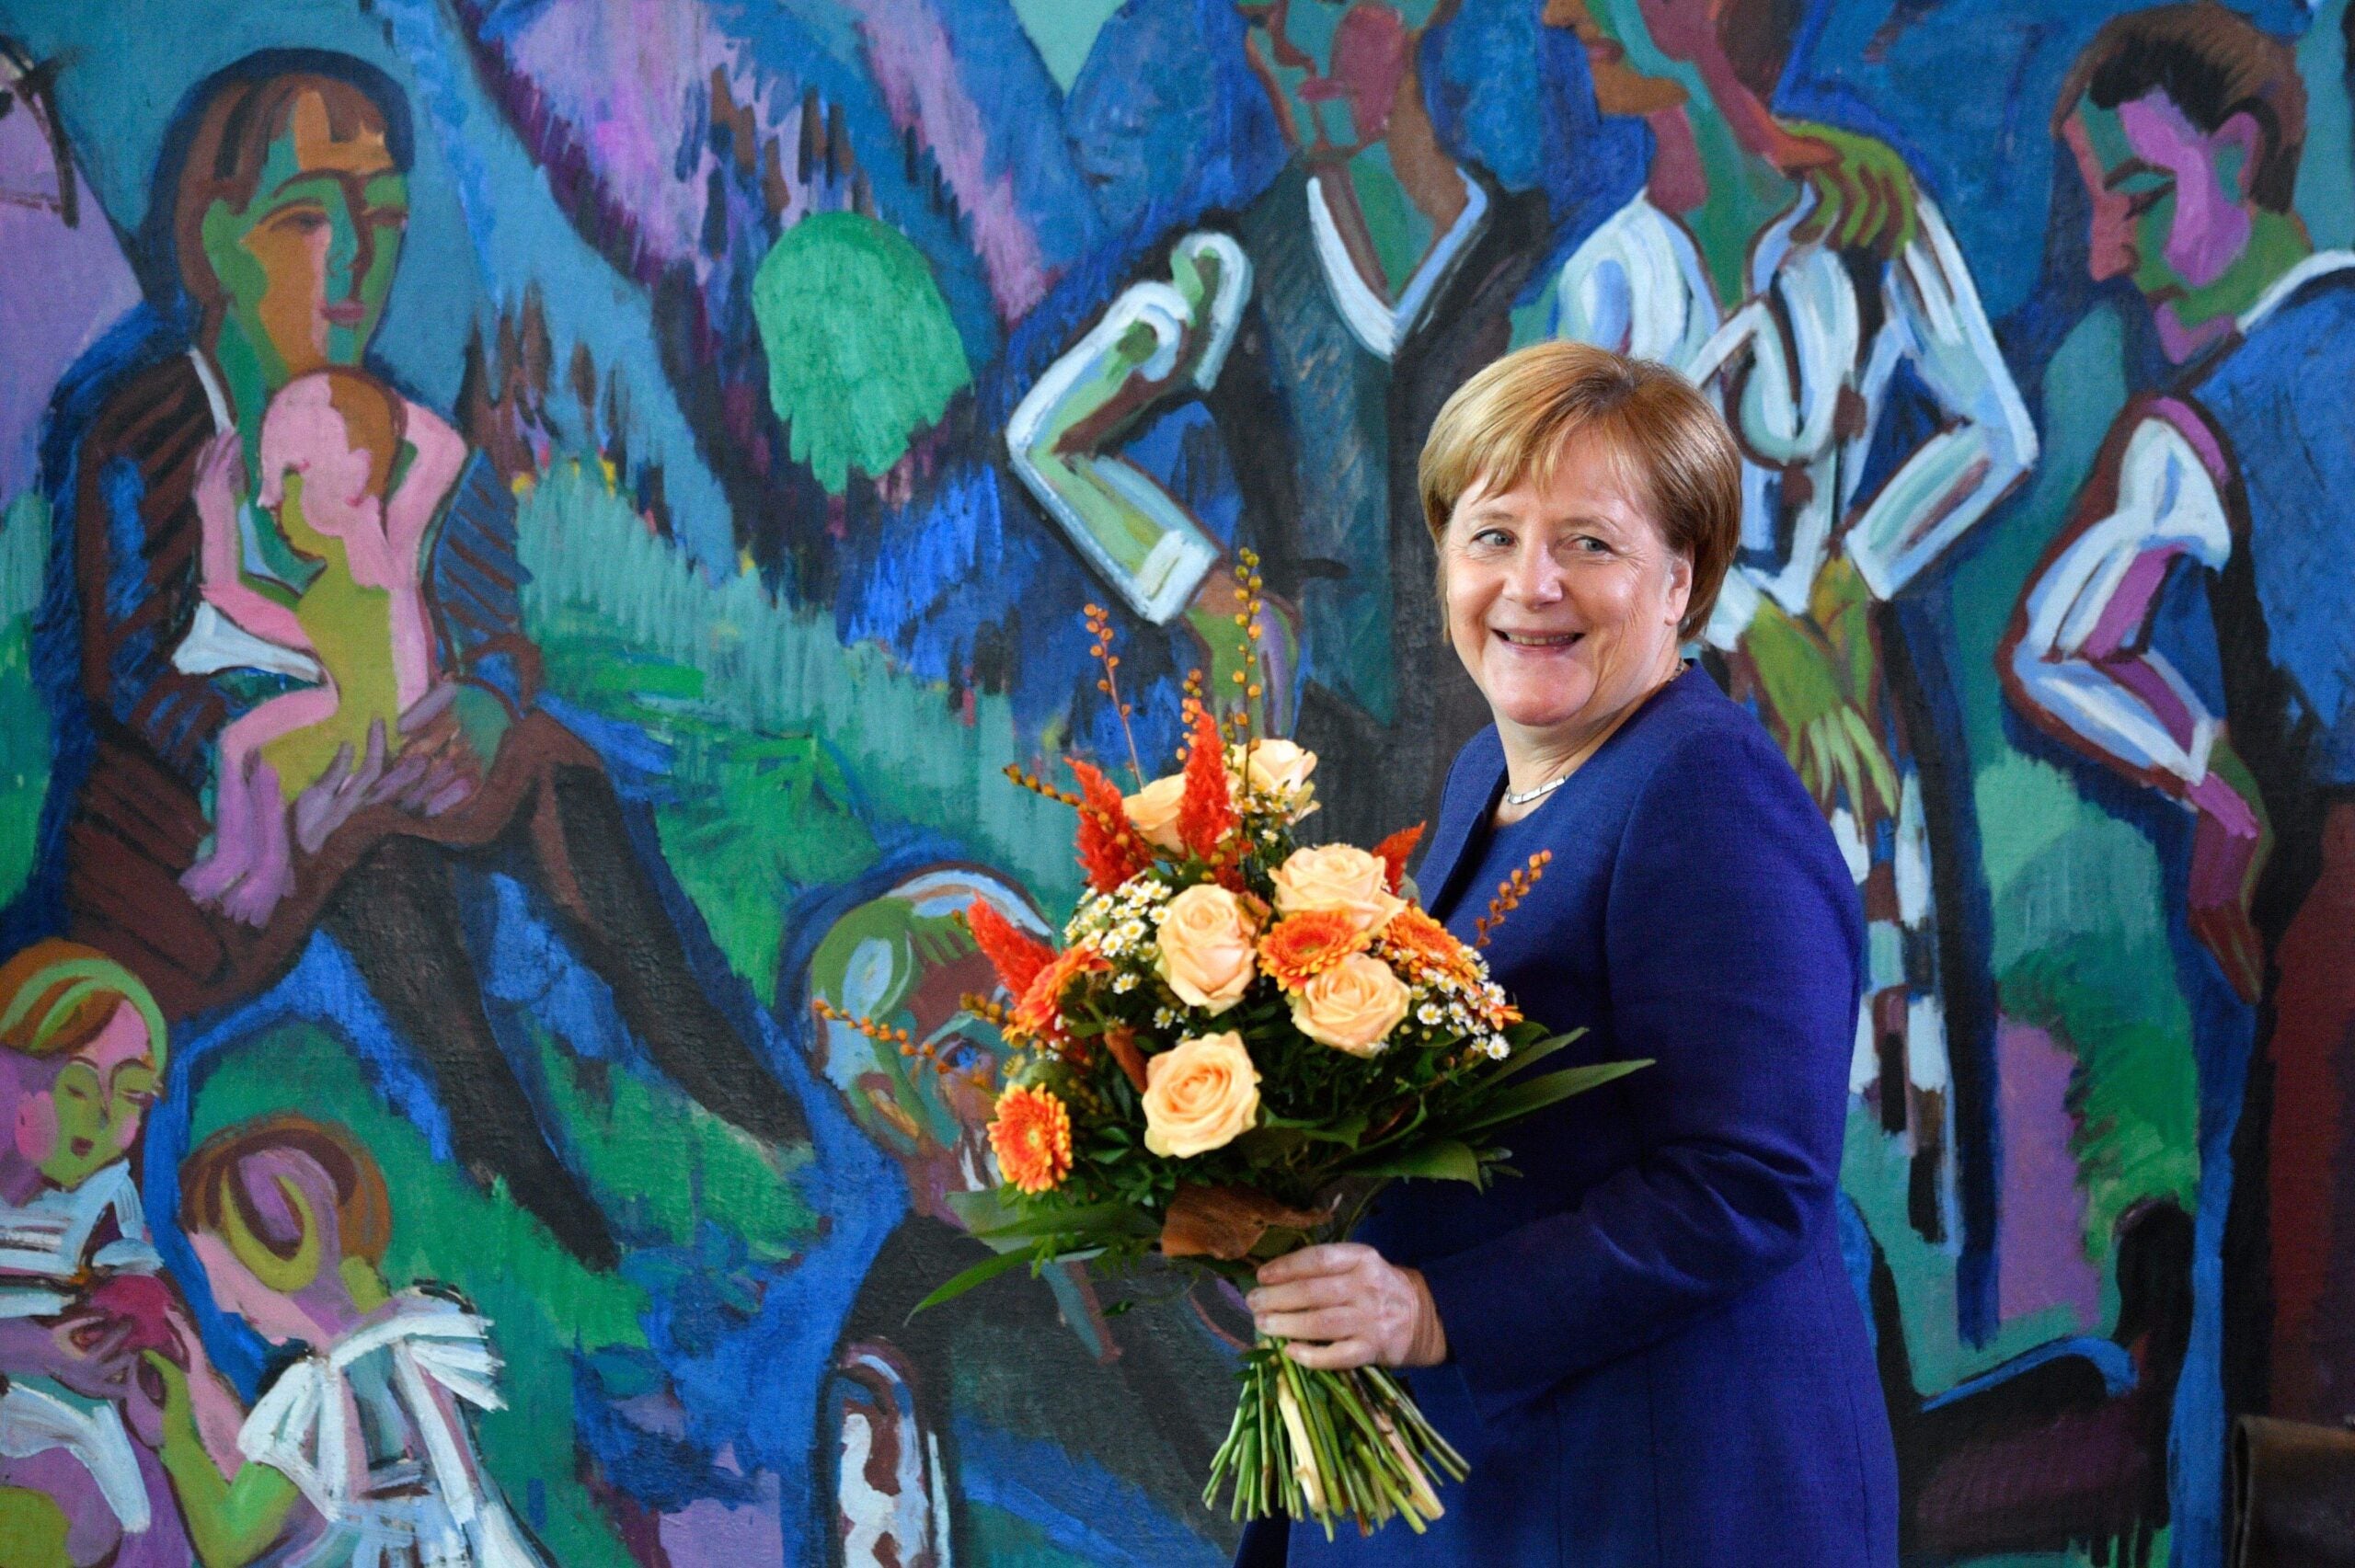 No, it is not “the beginning of the end” for Angela Merkel